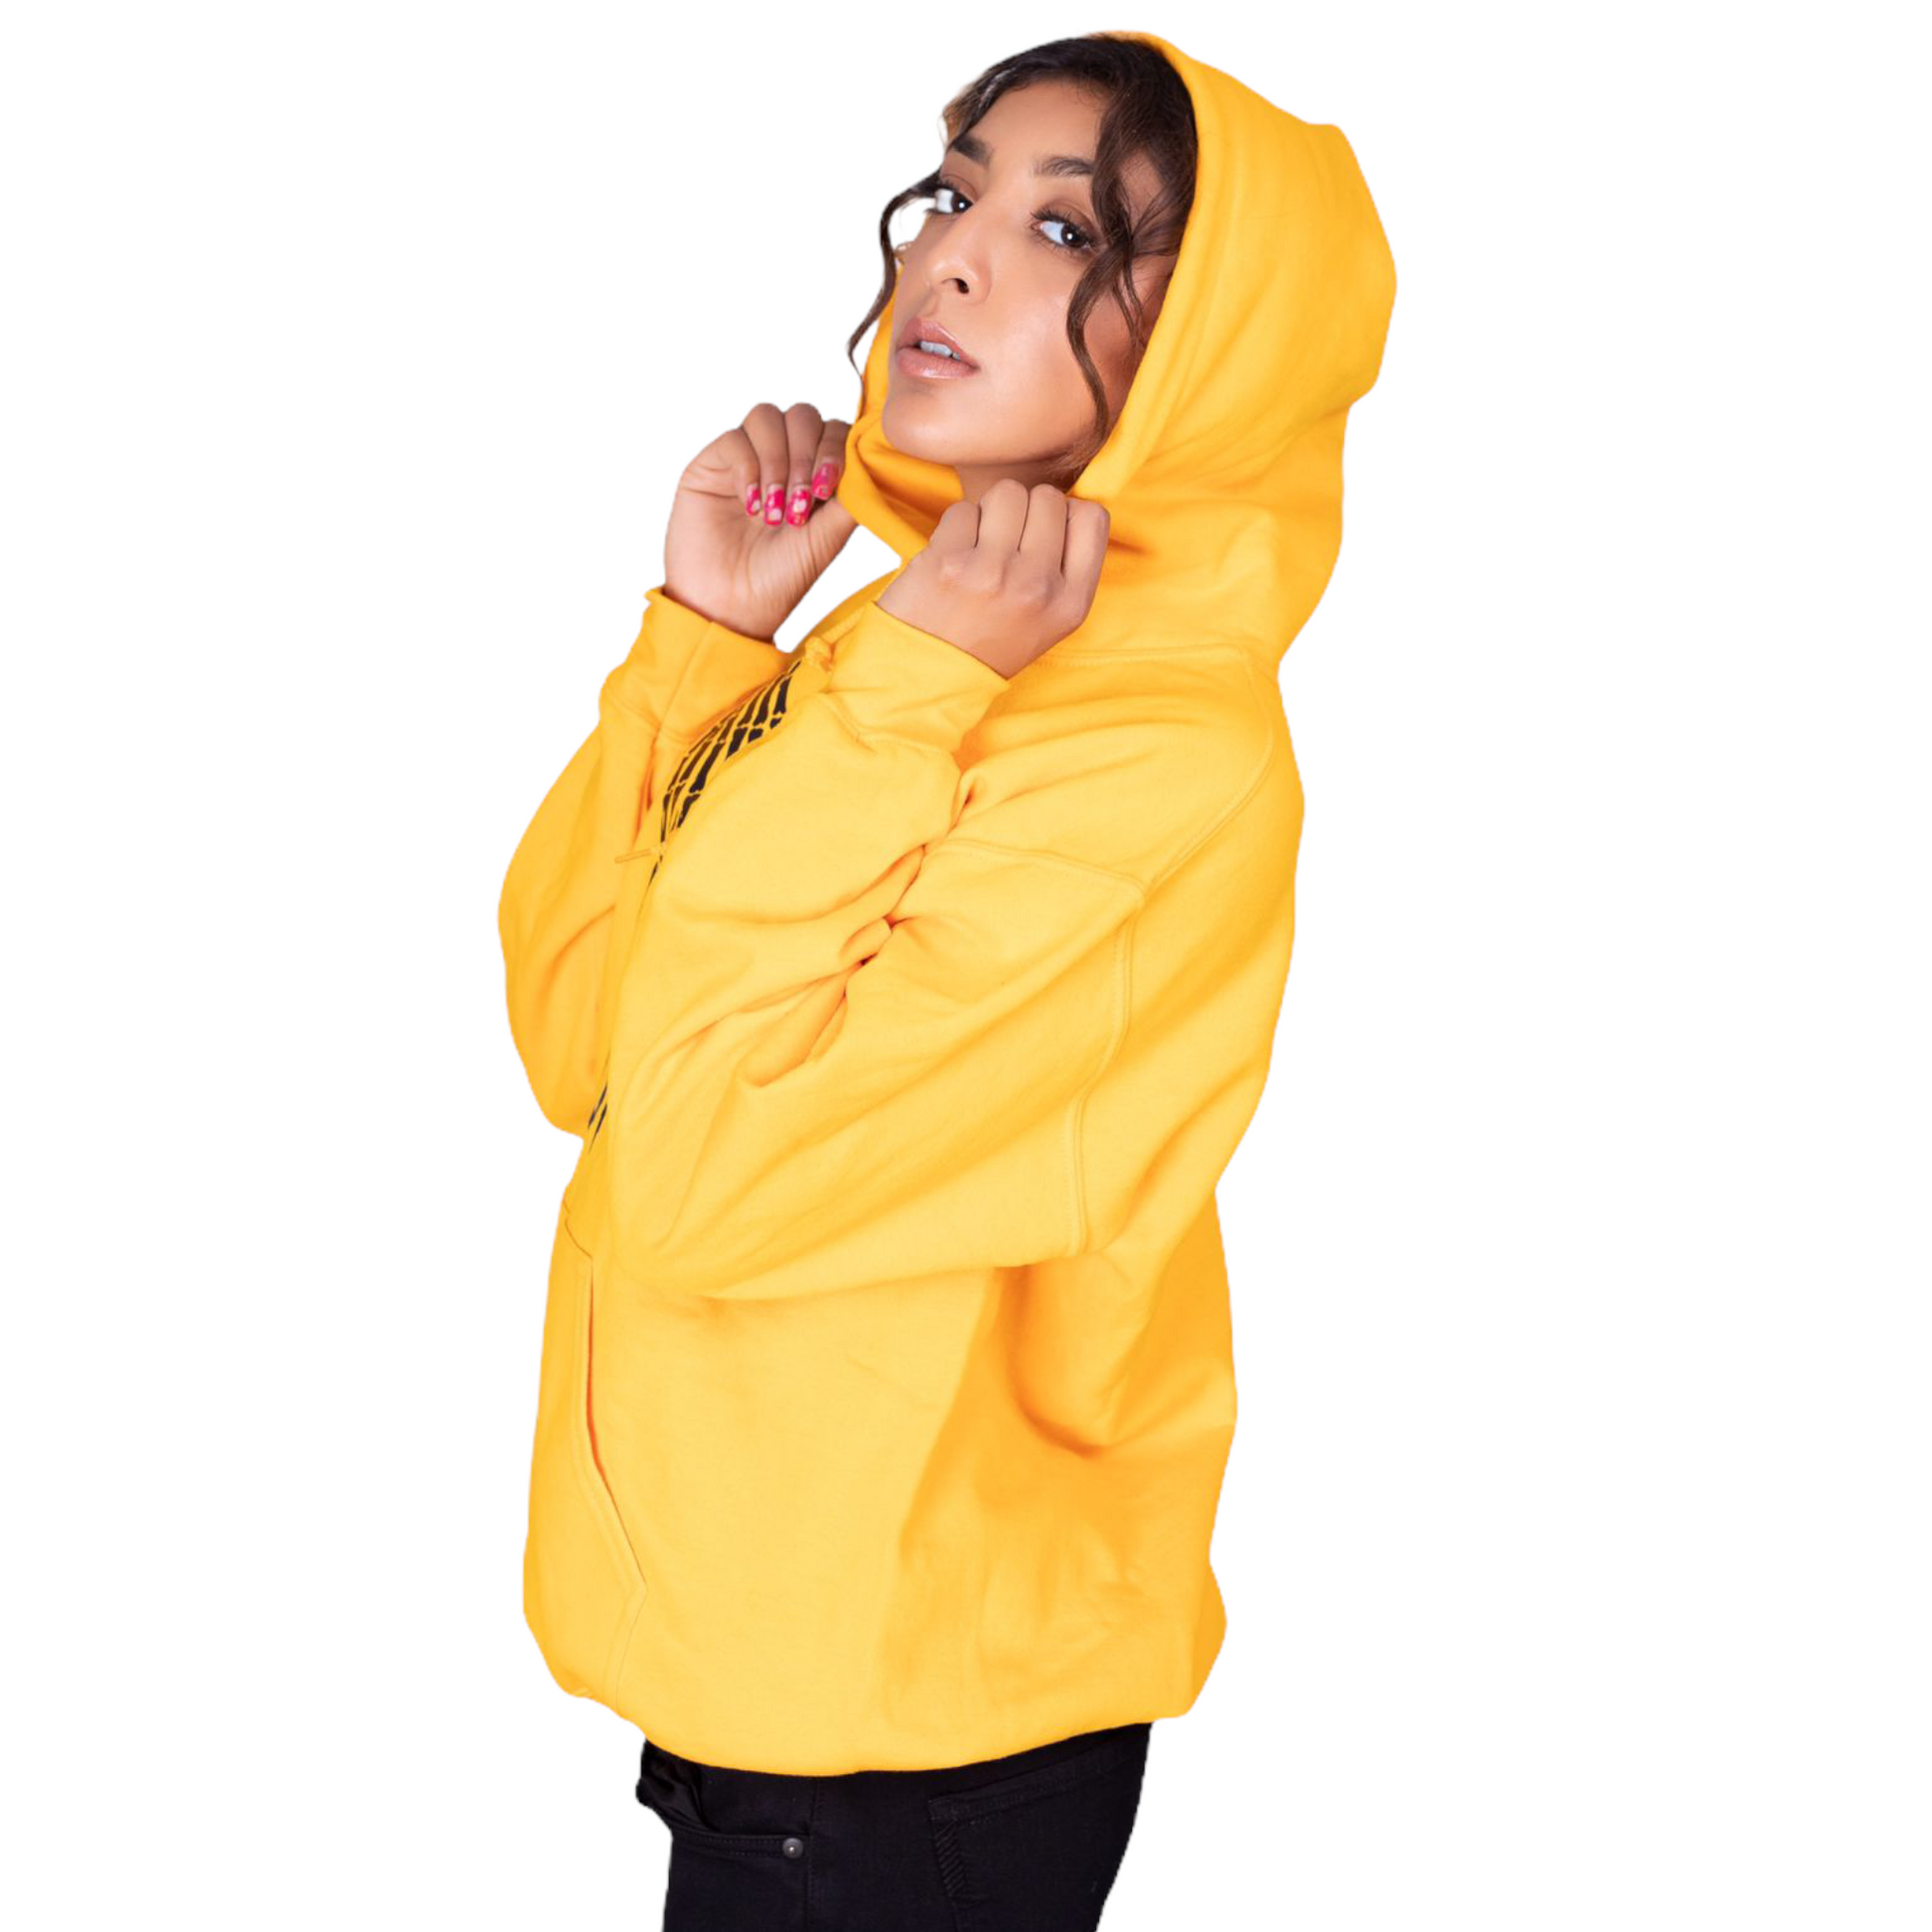 Pray A Lot Hoodie - (Men and Women) - colors (Light Red, Butter yellow) - TheSinners2Saints